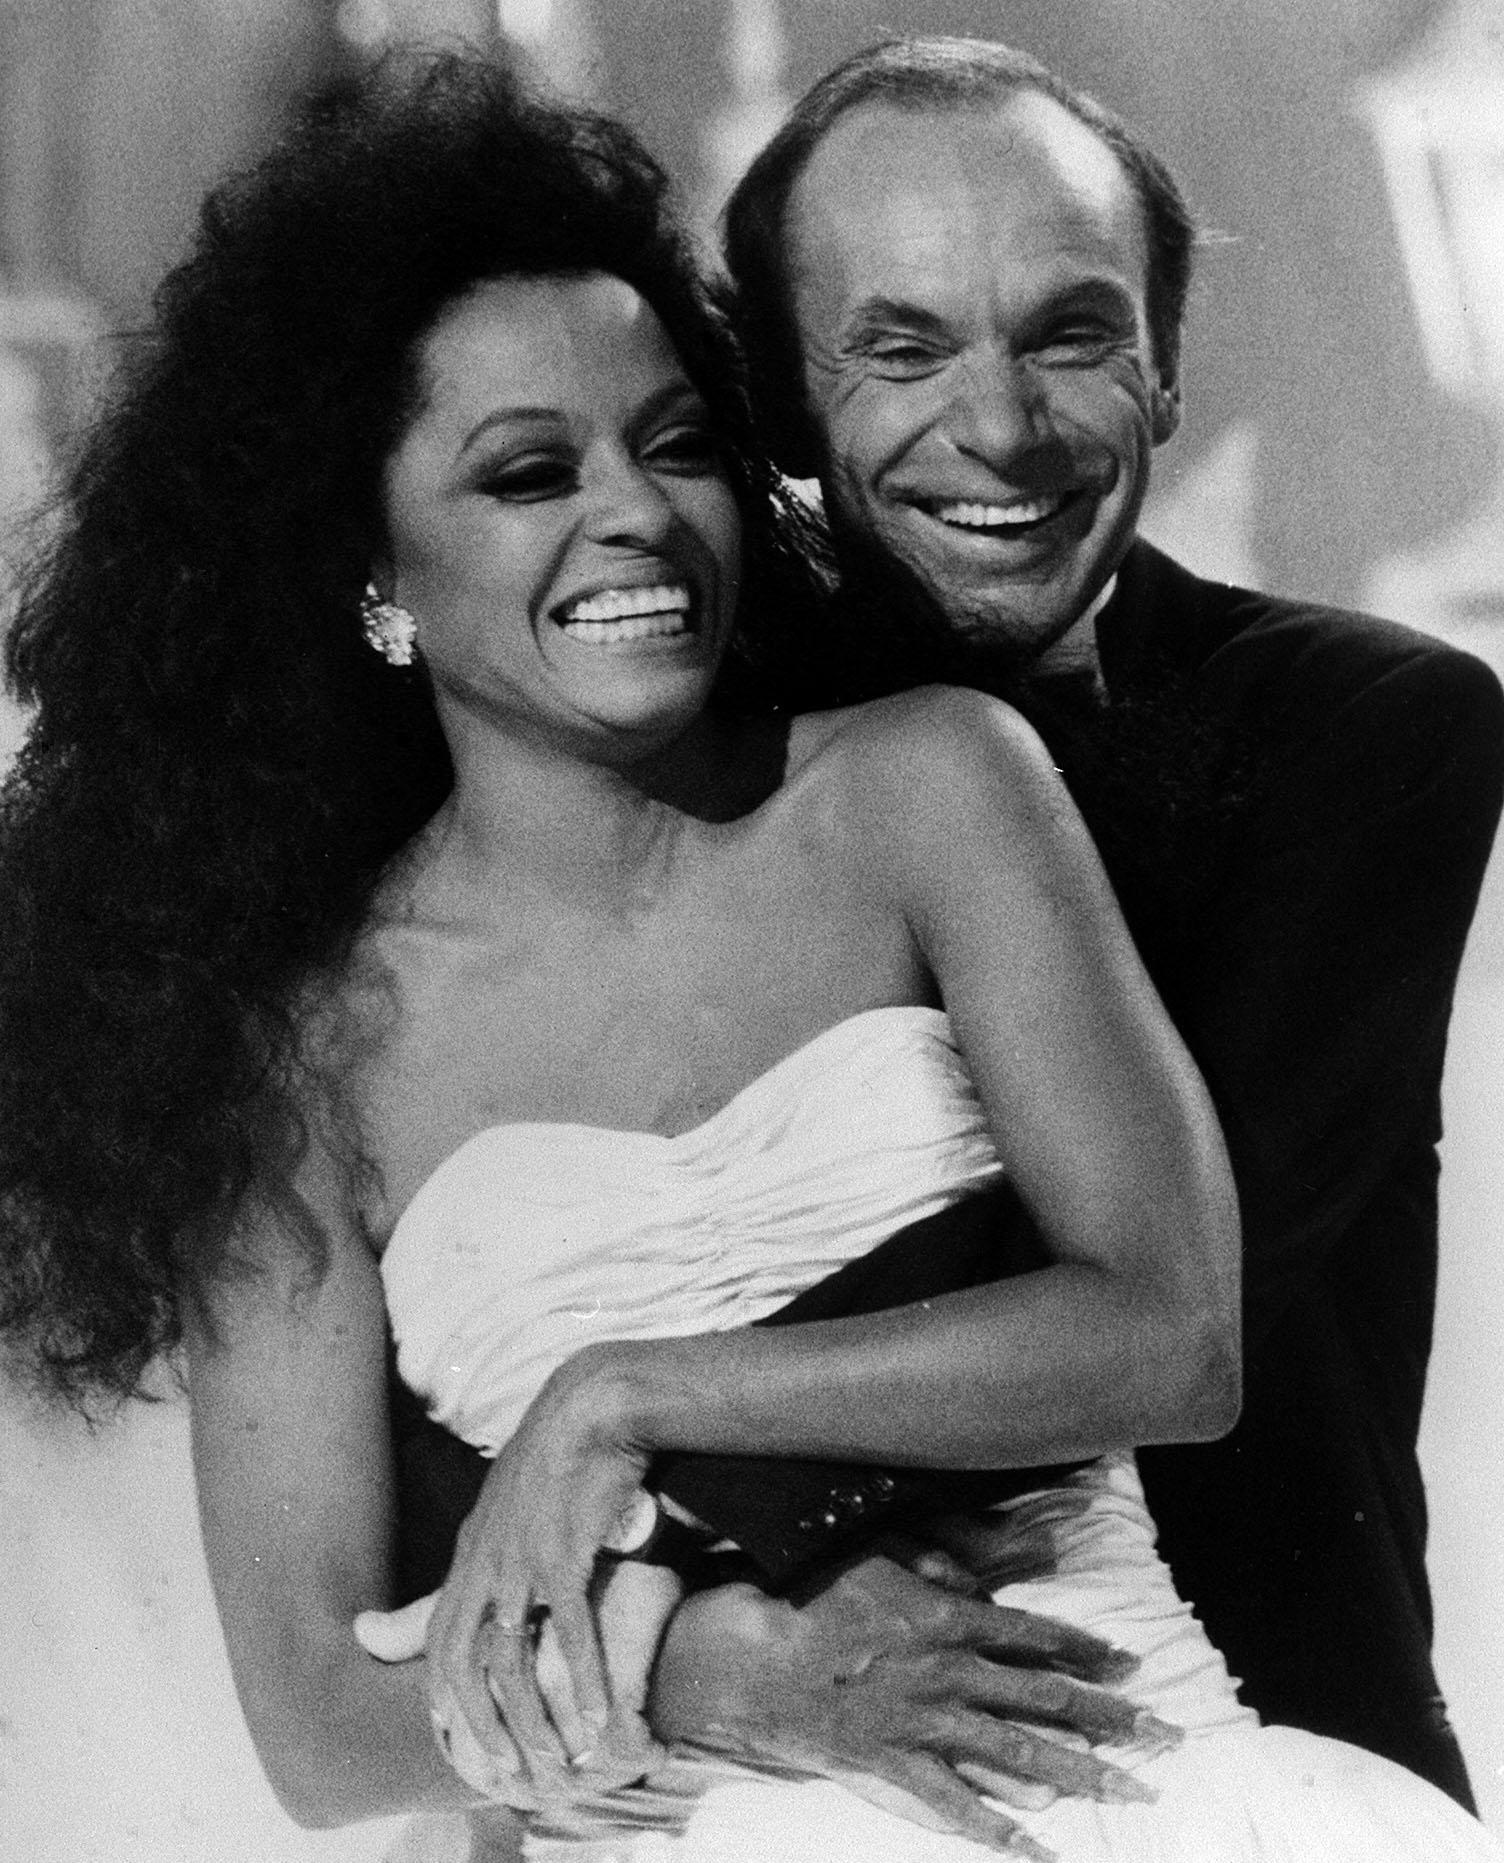 Diana Ross is pictured with her multi-millionaire husband Arne Næss, Jr. on September 25, 1986. | Source: Getty Images